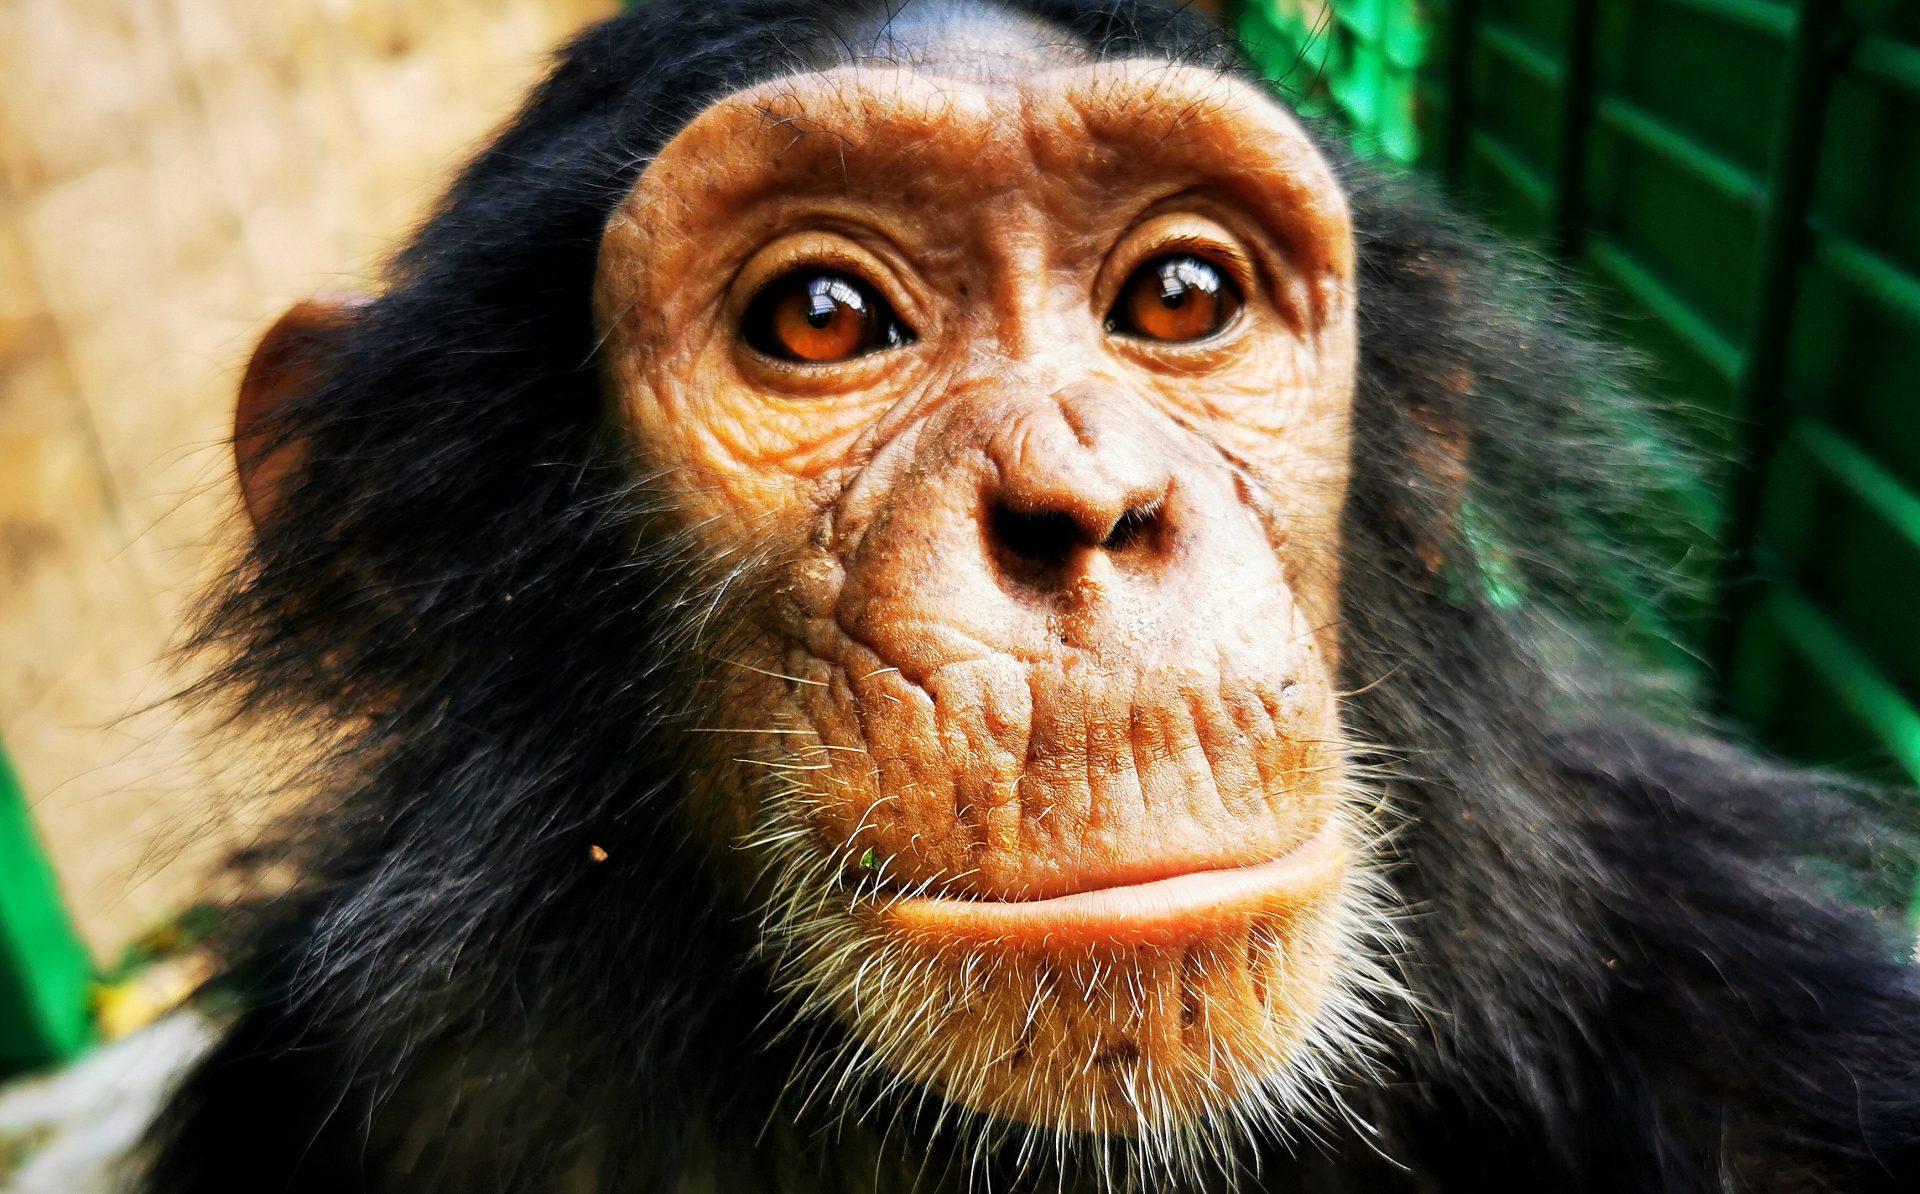 Tongo, the youngest chimp of our main group